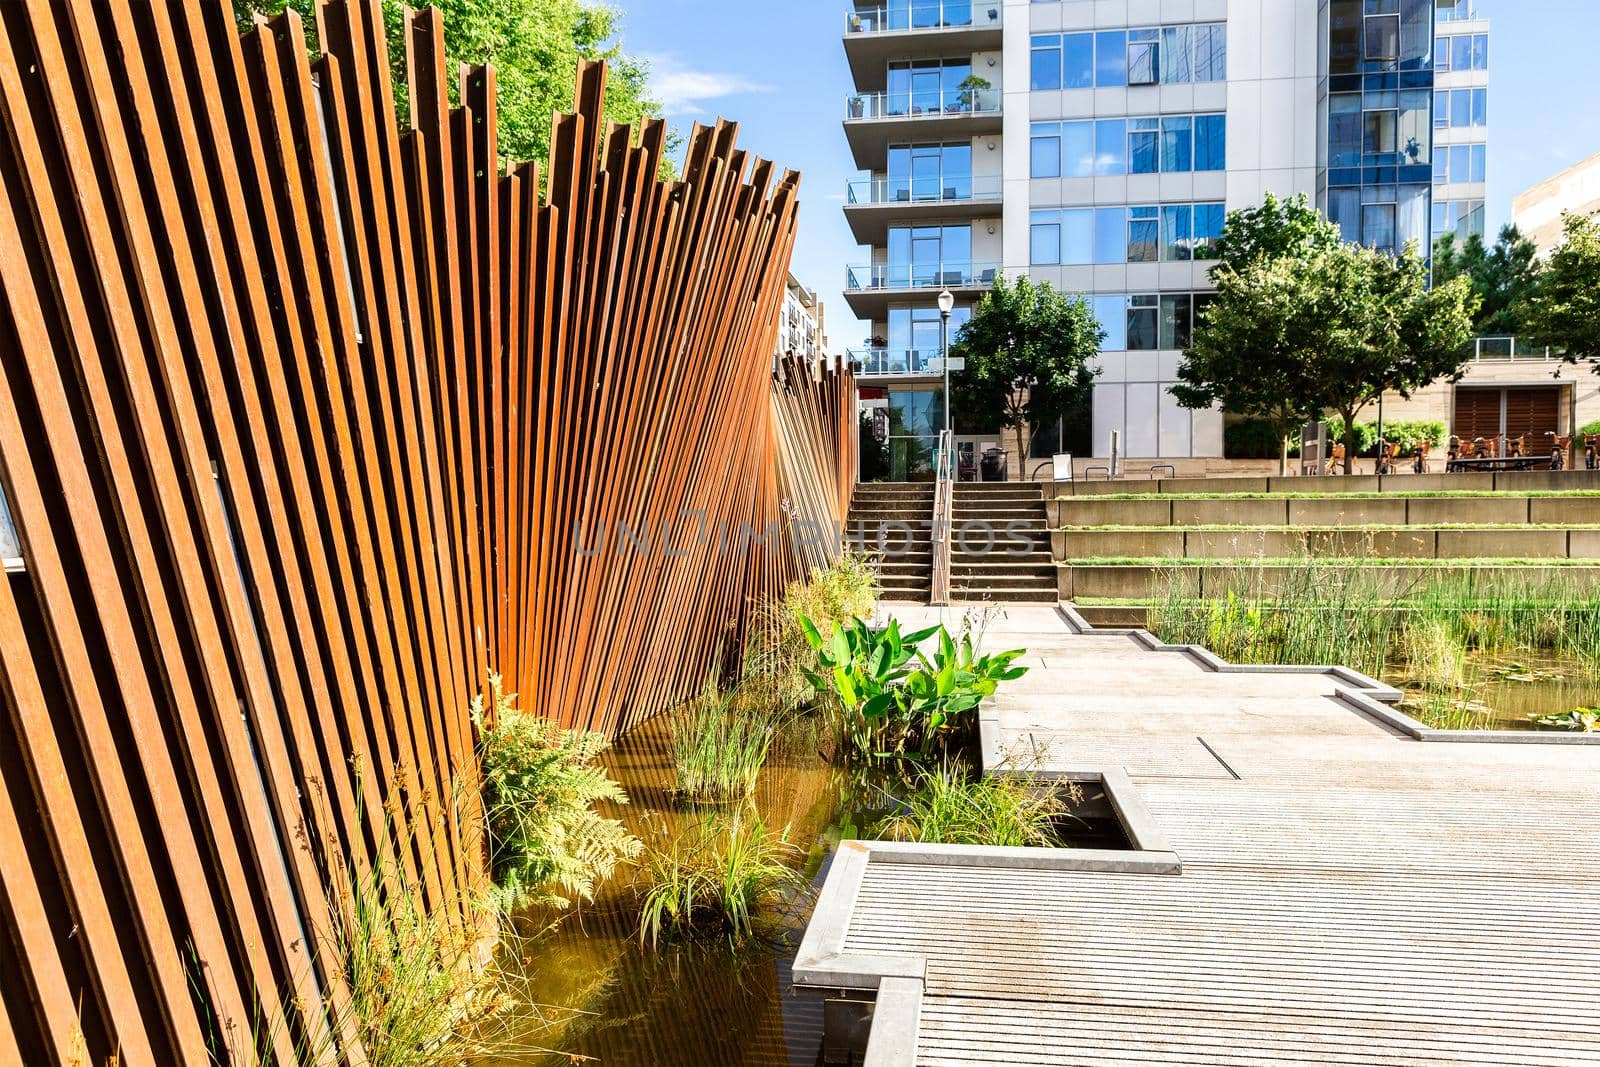 Tanner Springs Park, remediated wetland and naturalized public space in the area of Pearl District